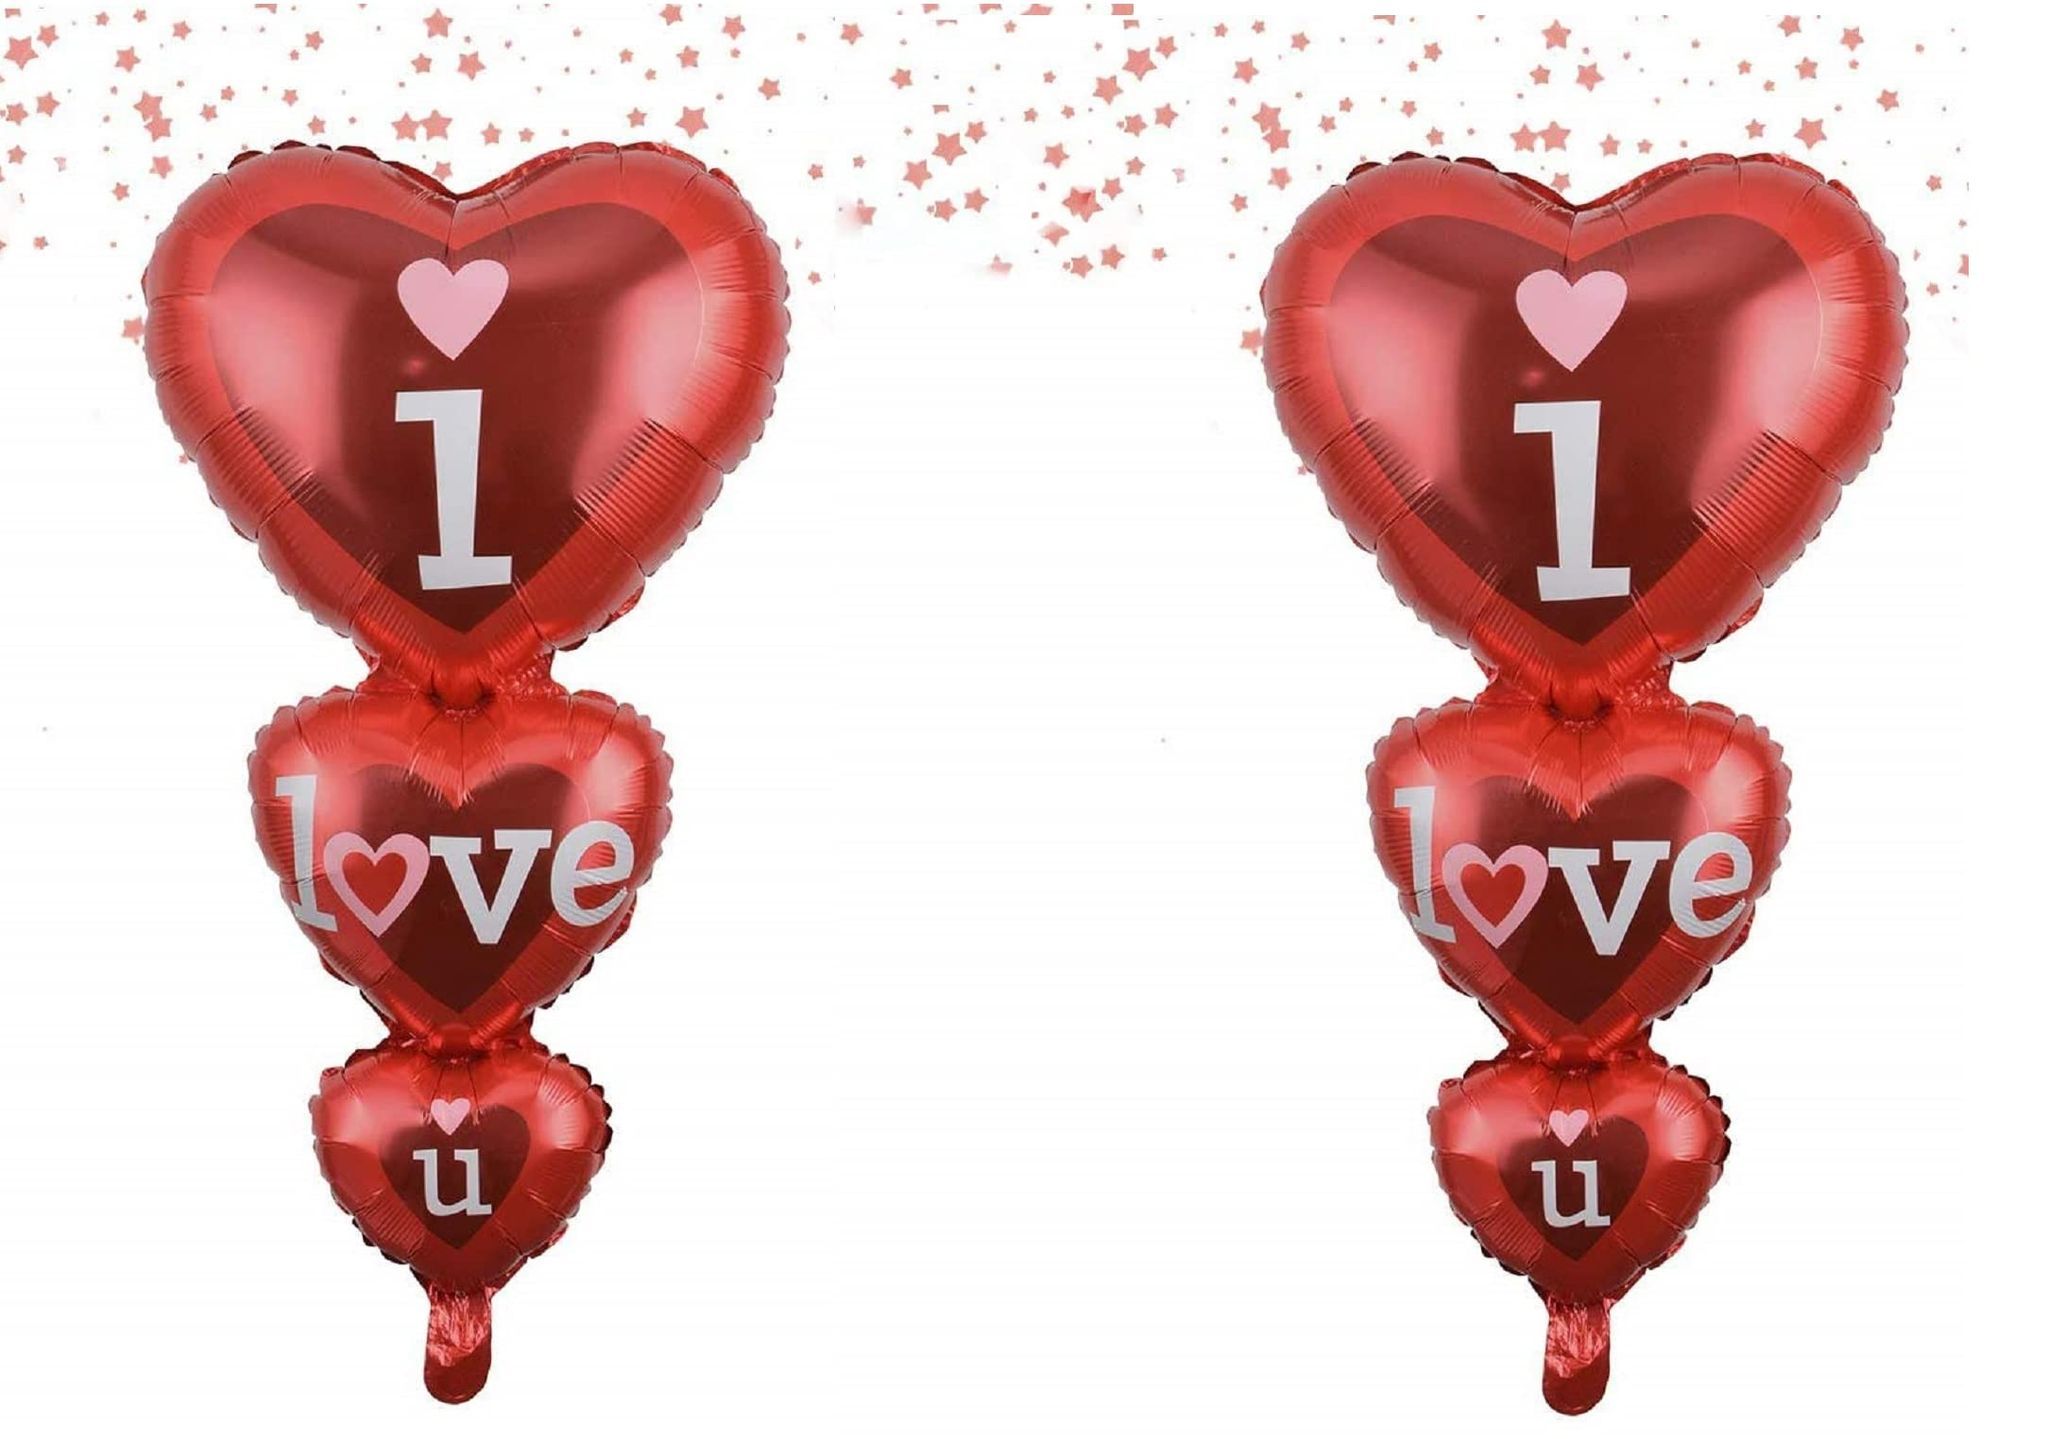 BLODLE Valentines Day Theme I Love You Foil Balloons, 2 Pcs I Love You Printed Red Heart Foil  for Anniversary, Birthday, Valentine Party Decoration - (Pack of 2 Pcs)